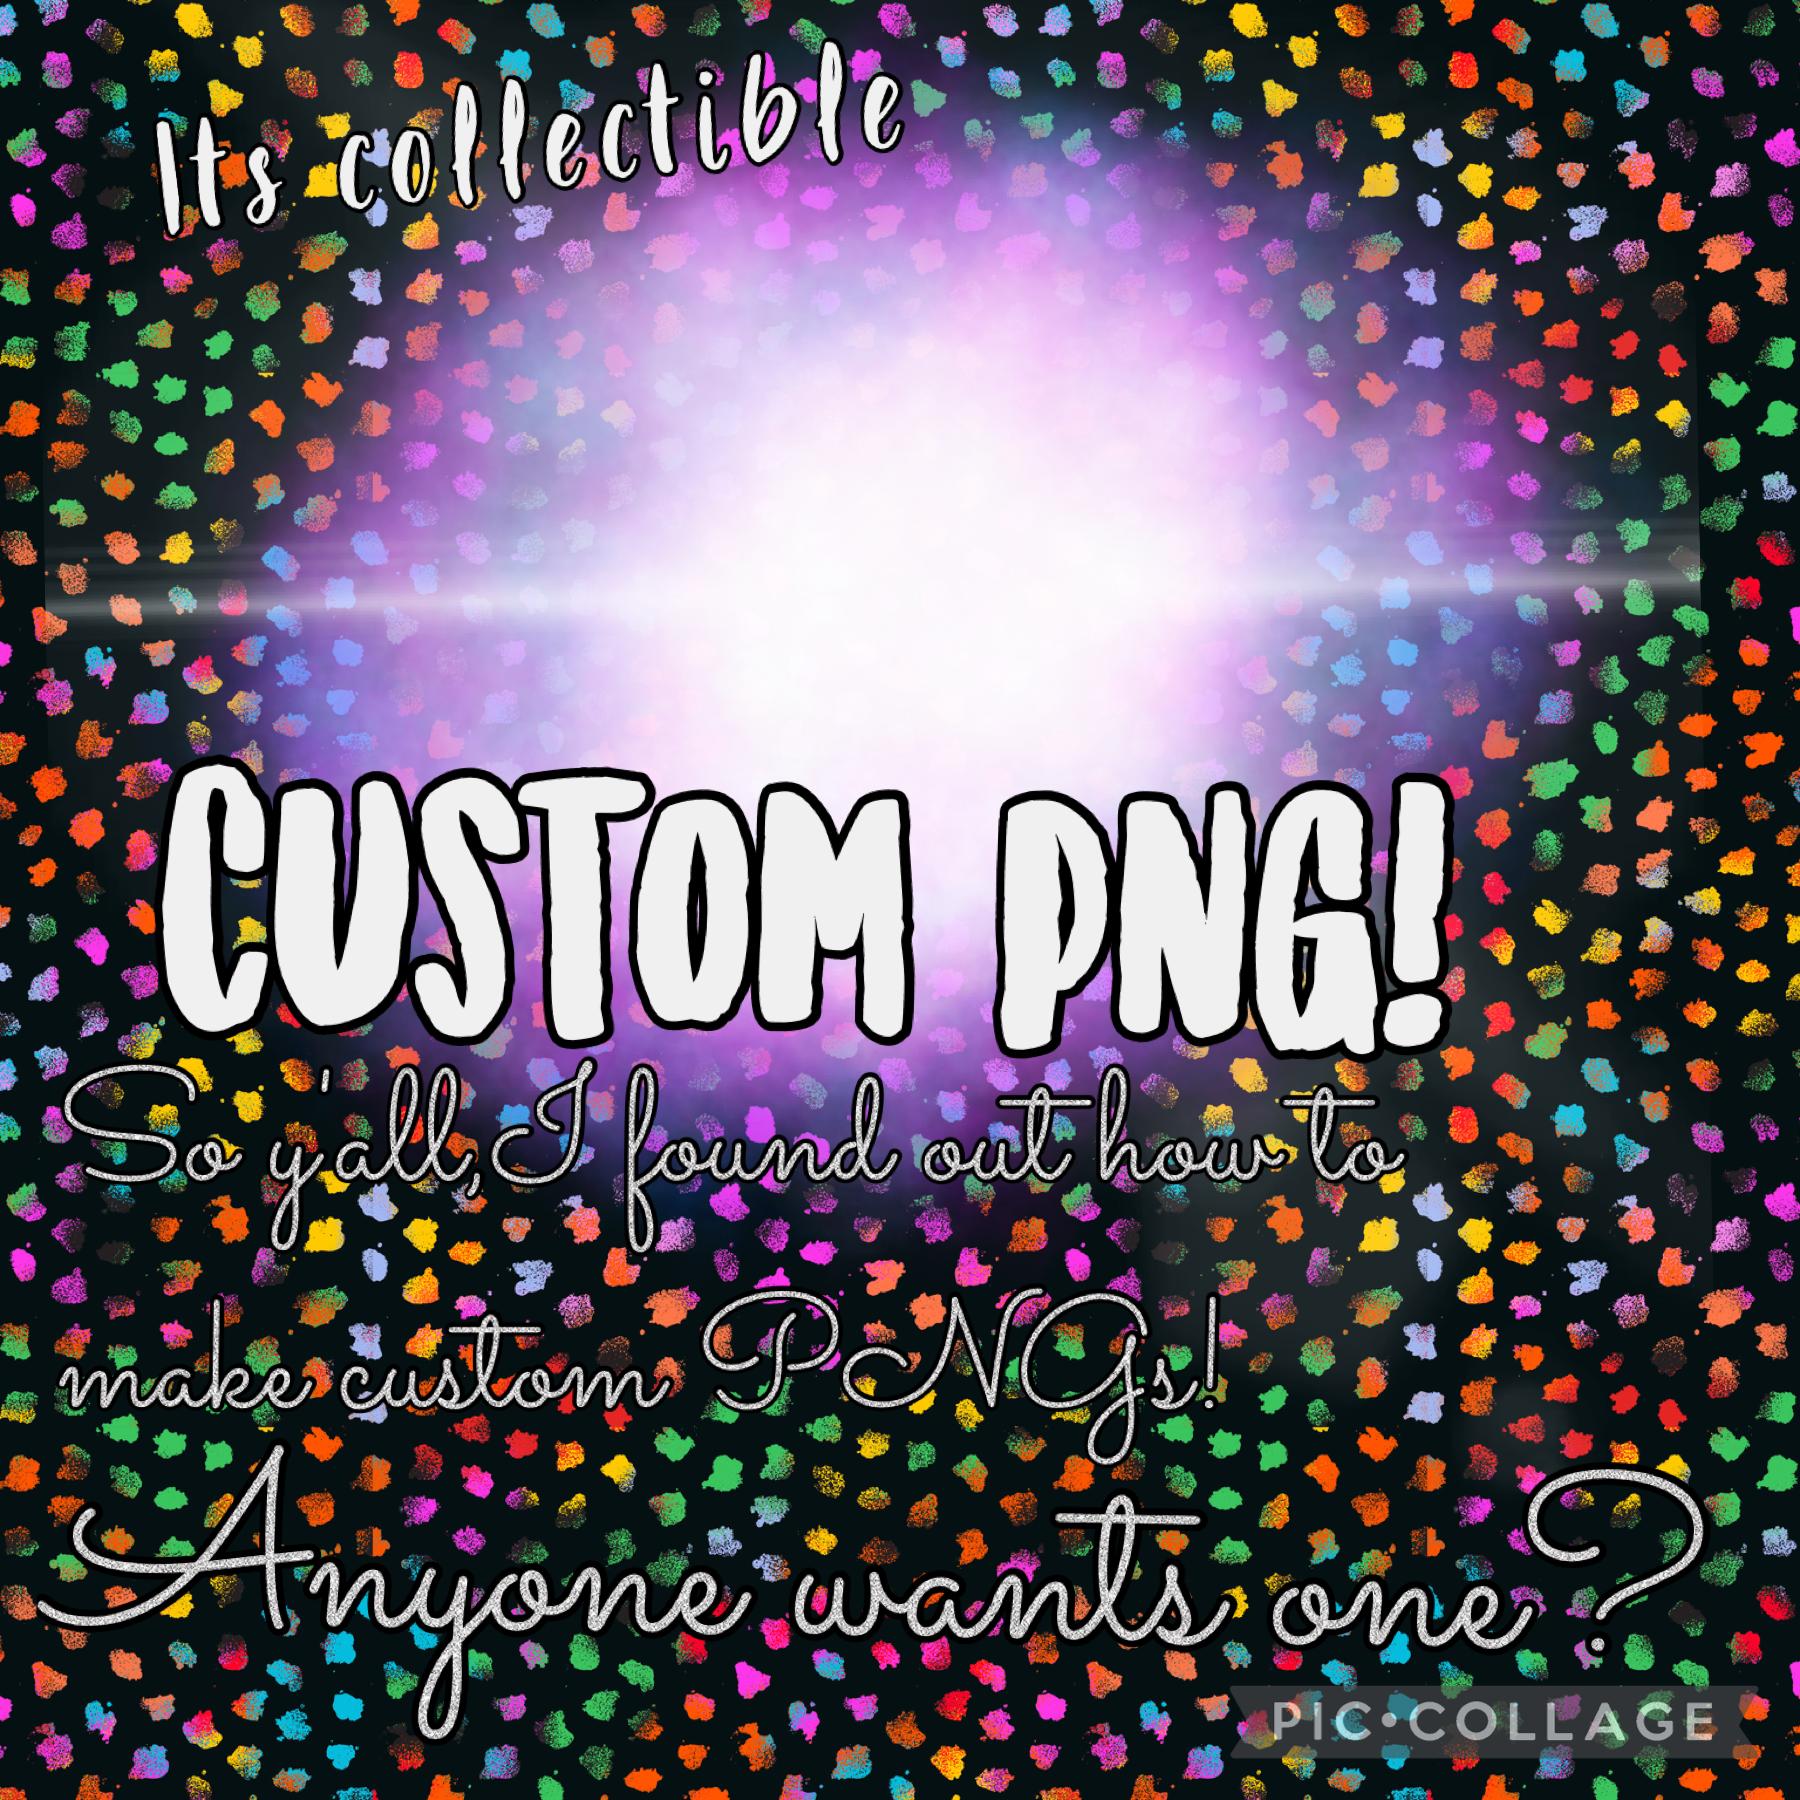 Want a custom png? Just ask!